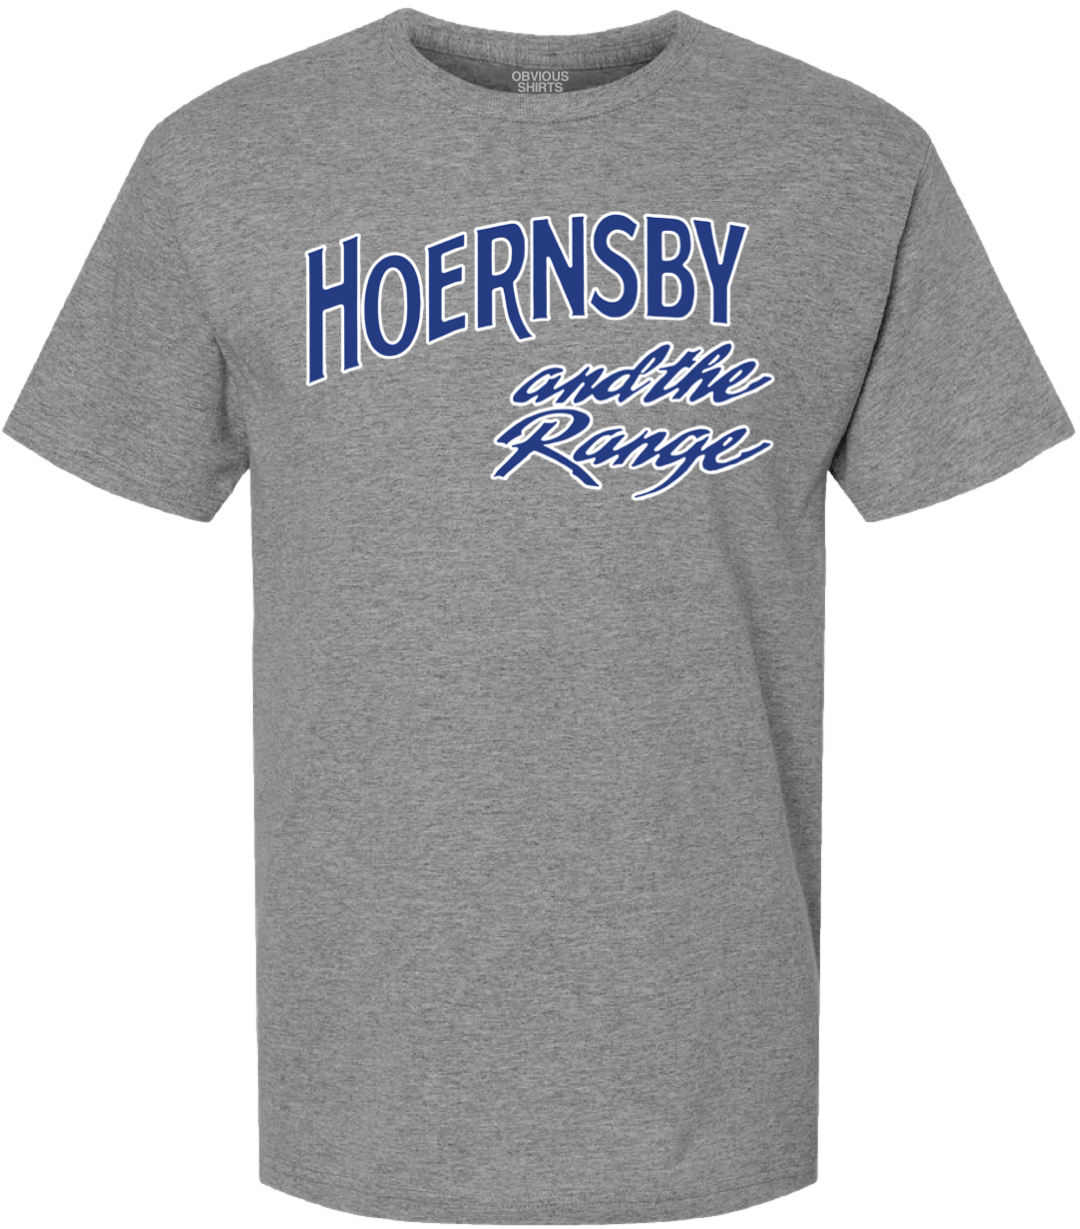 HOERNSBY AND THE RANGE. - OBVIOUS SHIRTS